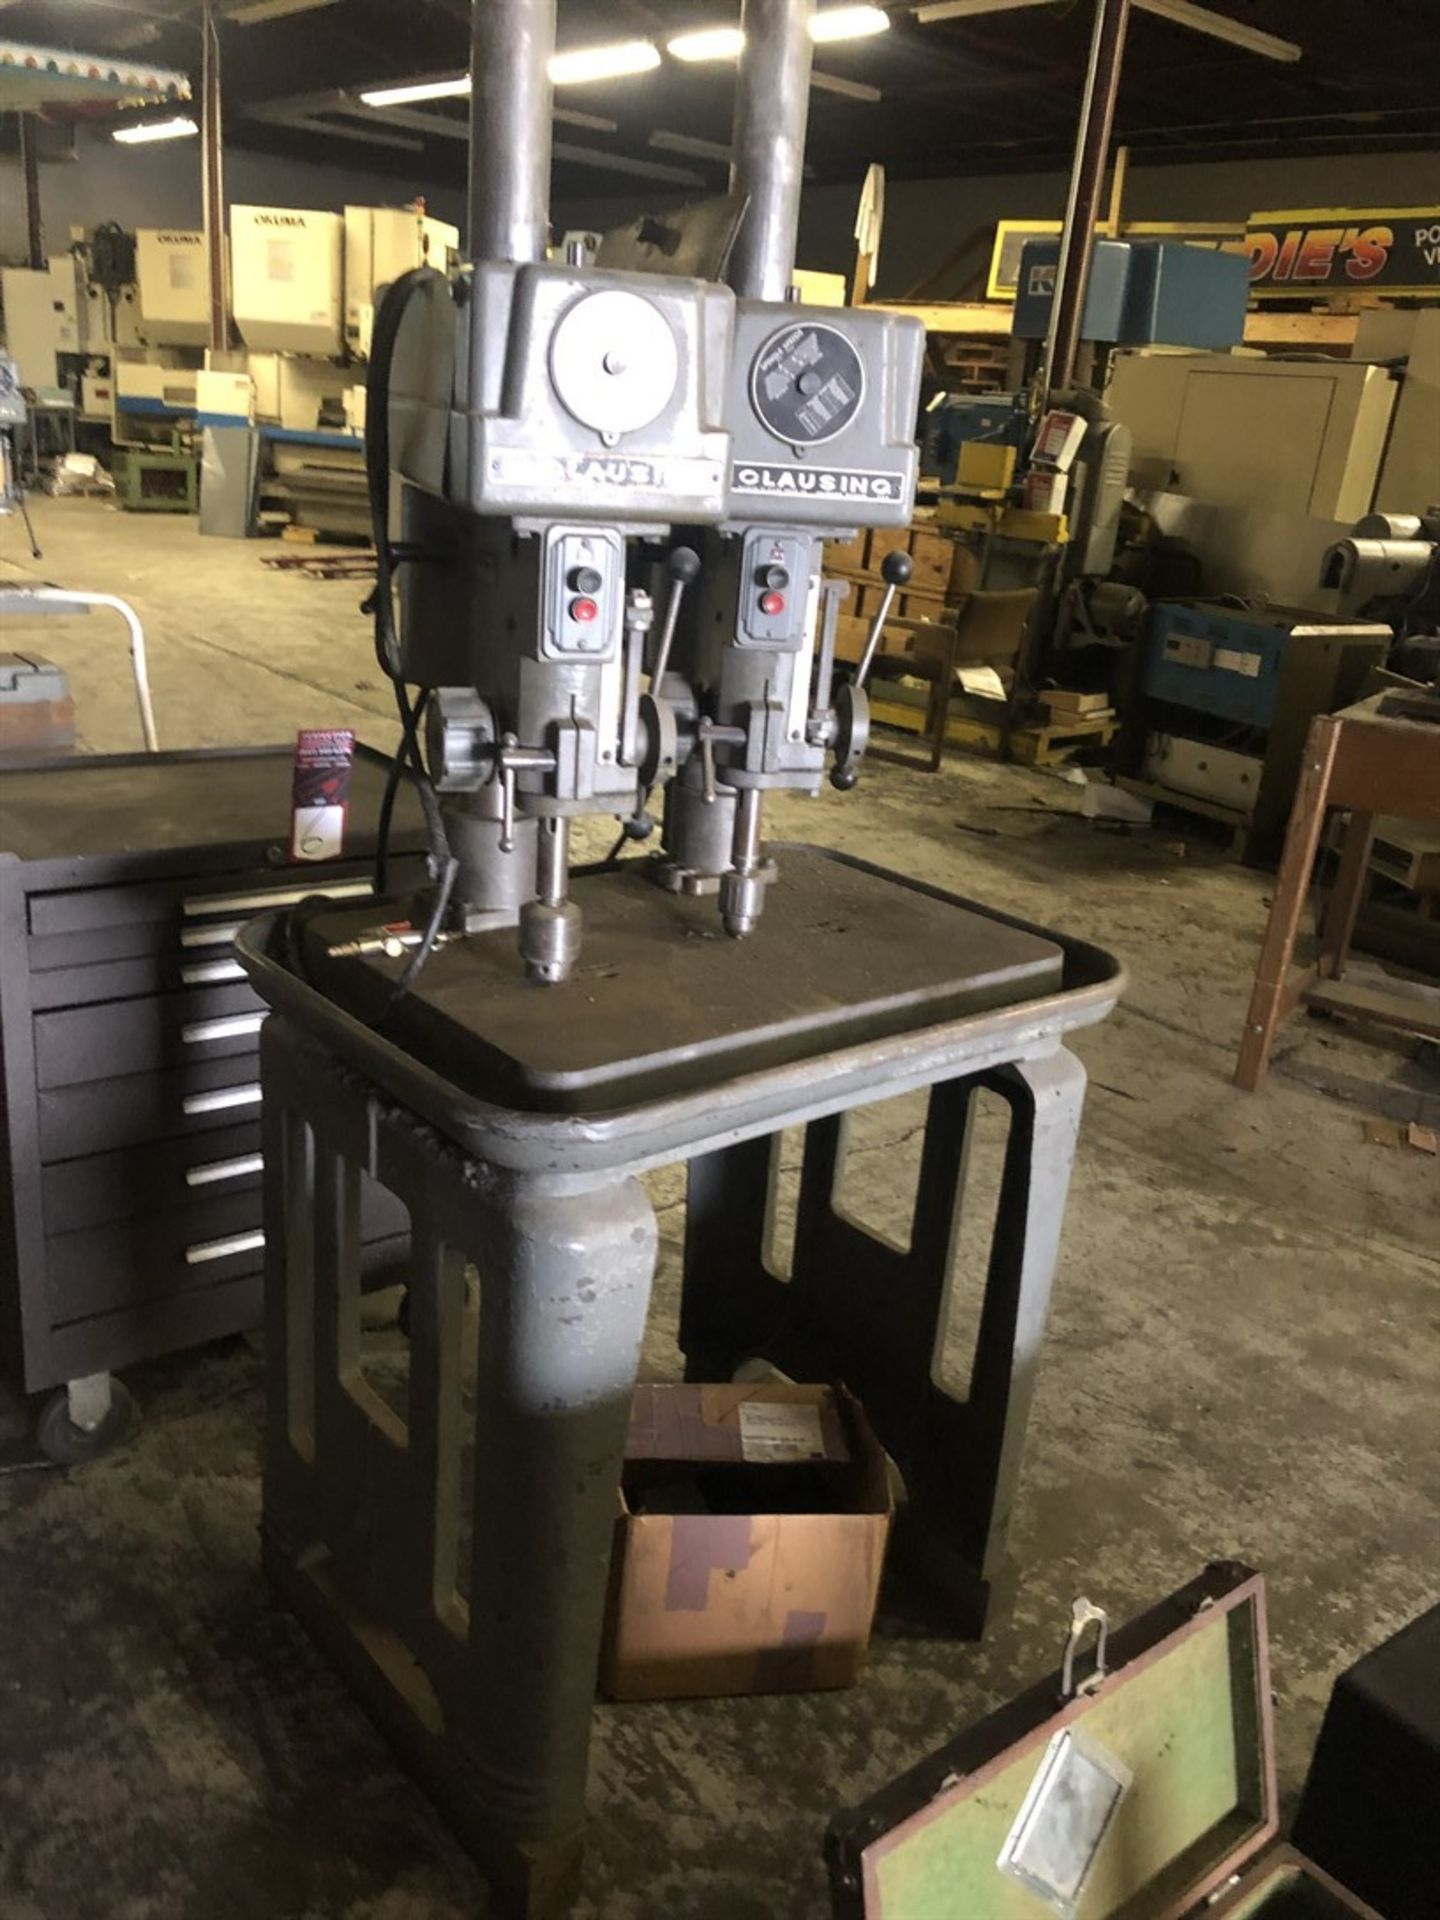 CLAUSING 1637 Gang Drill Press, s/n 114610, 114605, 15" Throat, 28x18 1/2" Table - Image 2 of 2